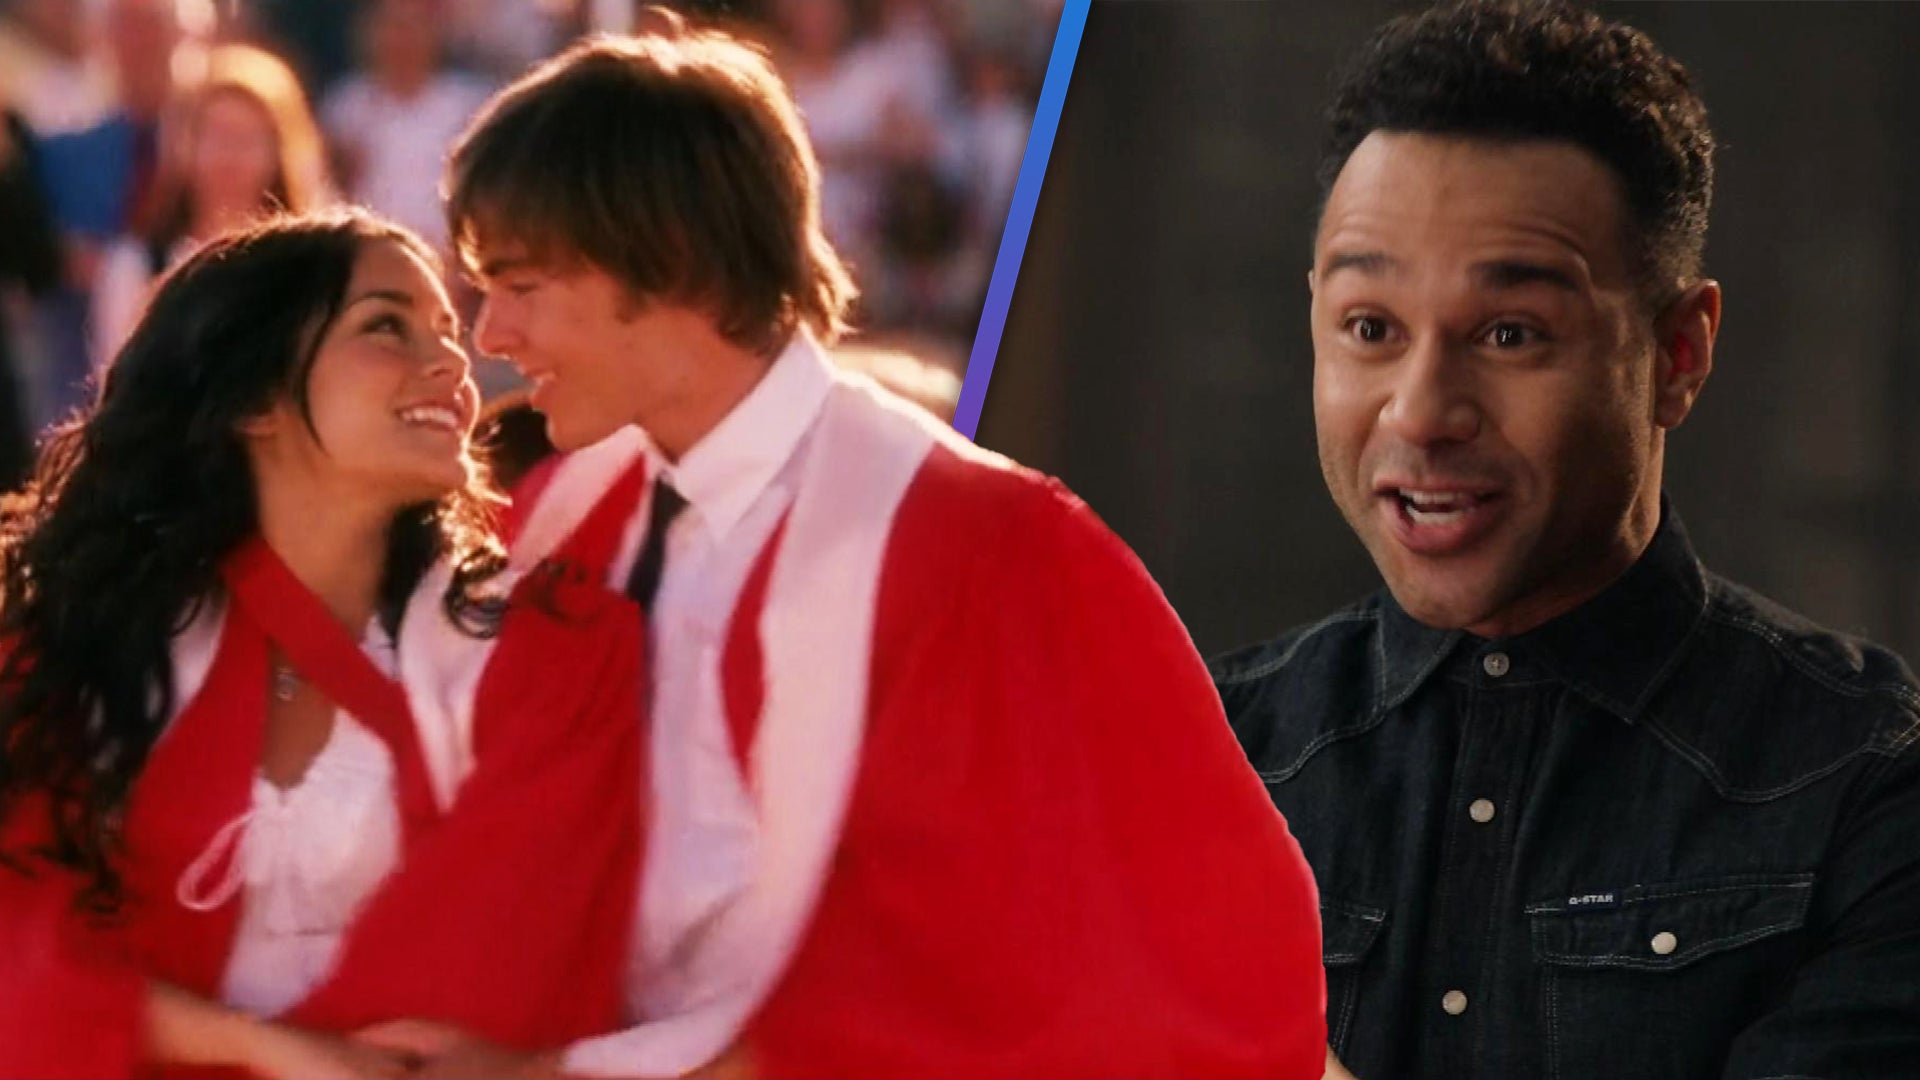 Watch: 'High School Musical: The Musical: The Series' Stars Talk Season 4  In Exclusive Clip